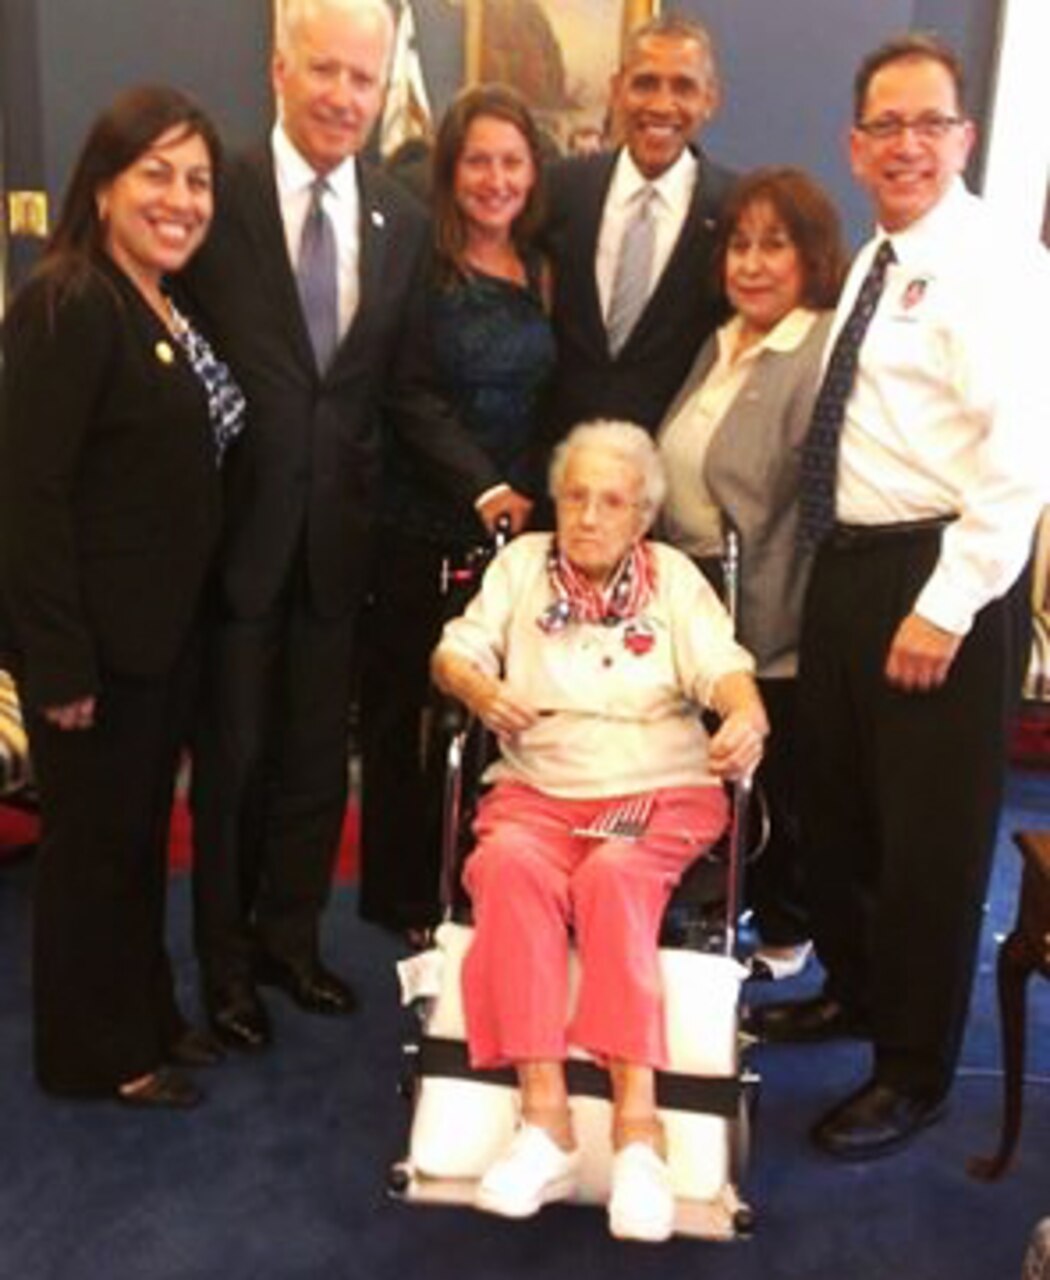 Lucy Coffey, a 108-year-old World War II Army veteran, traveled from San Antonio to Washington, D.C., for a visit with President Barack Obama and Vice President Joe Biden at the White House, July 25, 2014. Courtesy photo